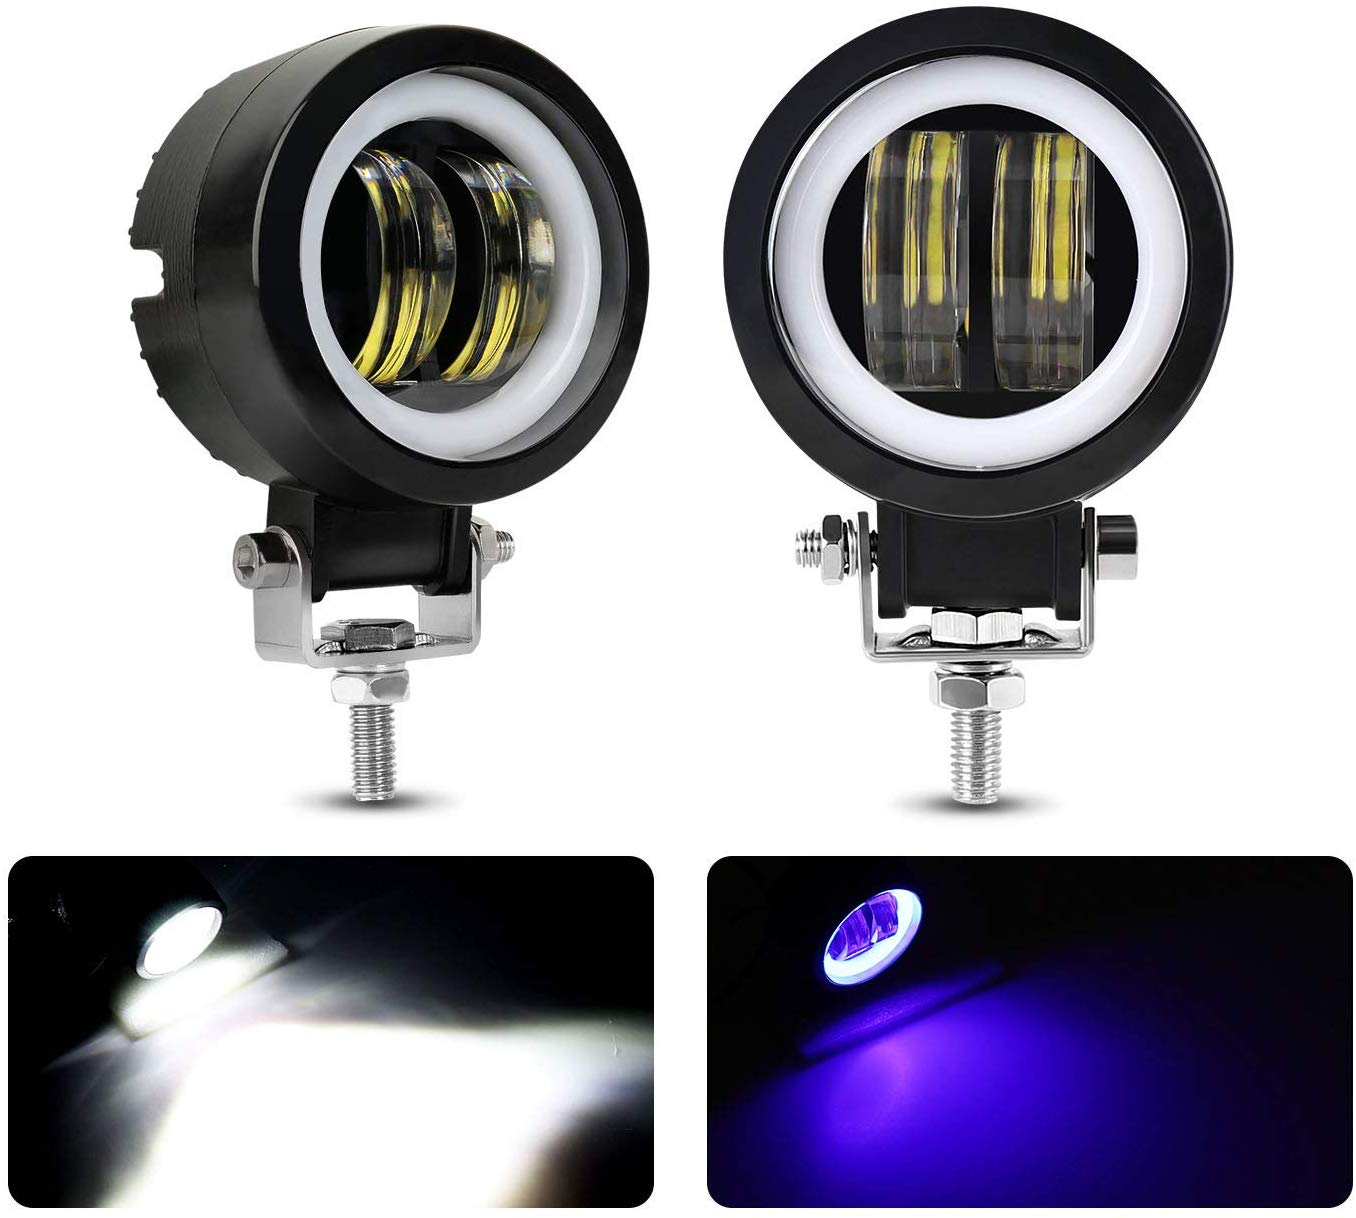 3 Inch 40w Round IP68 Waterproof Motorcycle Led Fog Light Kit with DRL for Motorbike Auxiliary Turn Signal